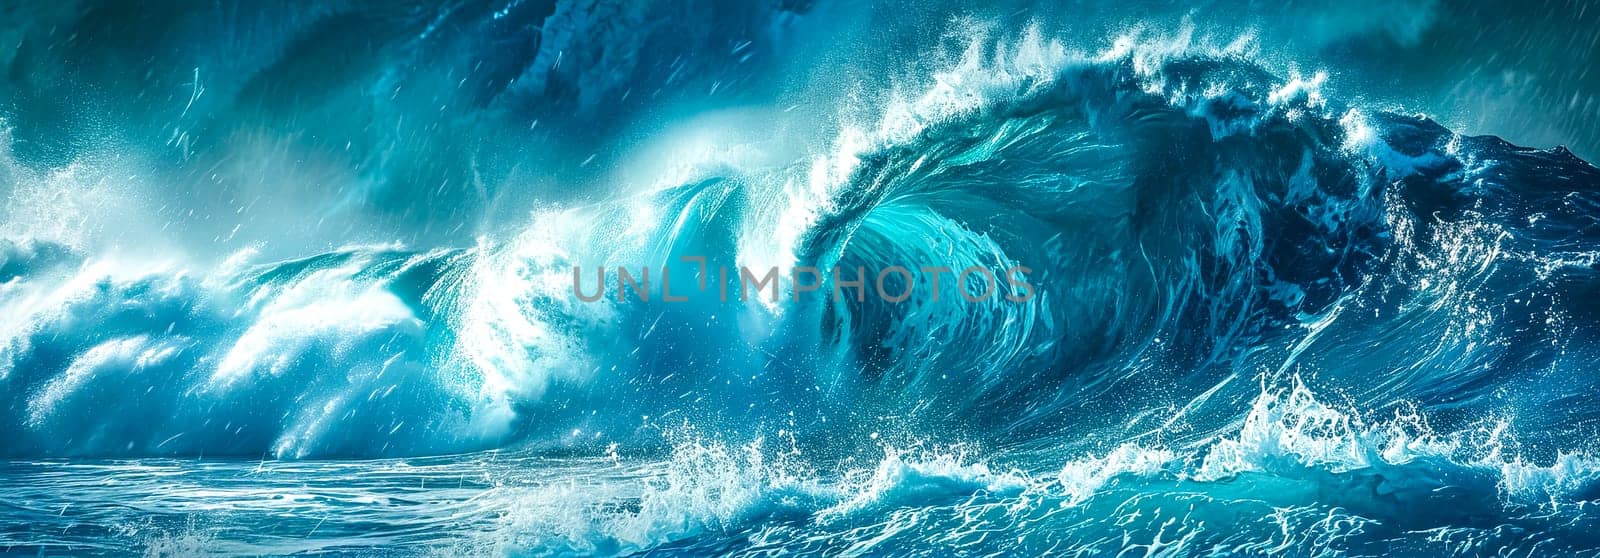 Majestic large ocean wave cresting with power and spray, a dynamic force of nature captured in blue tones. by Edophoto